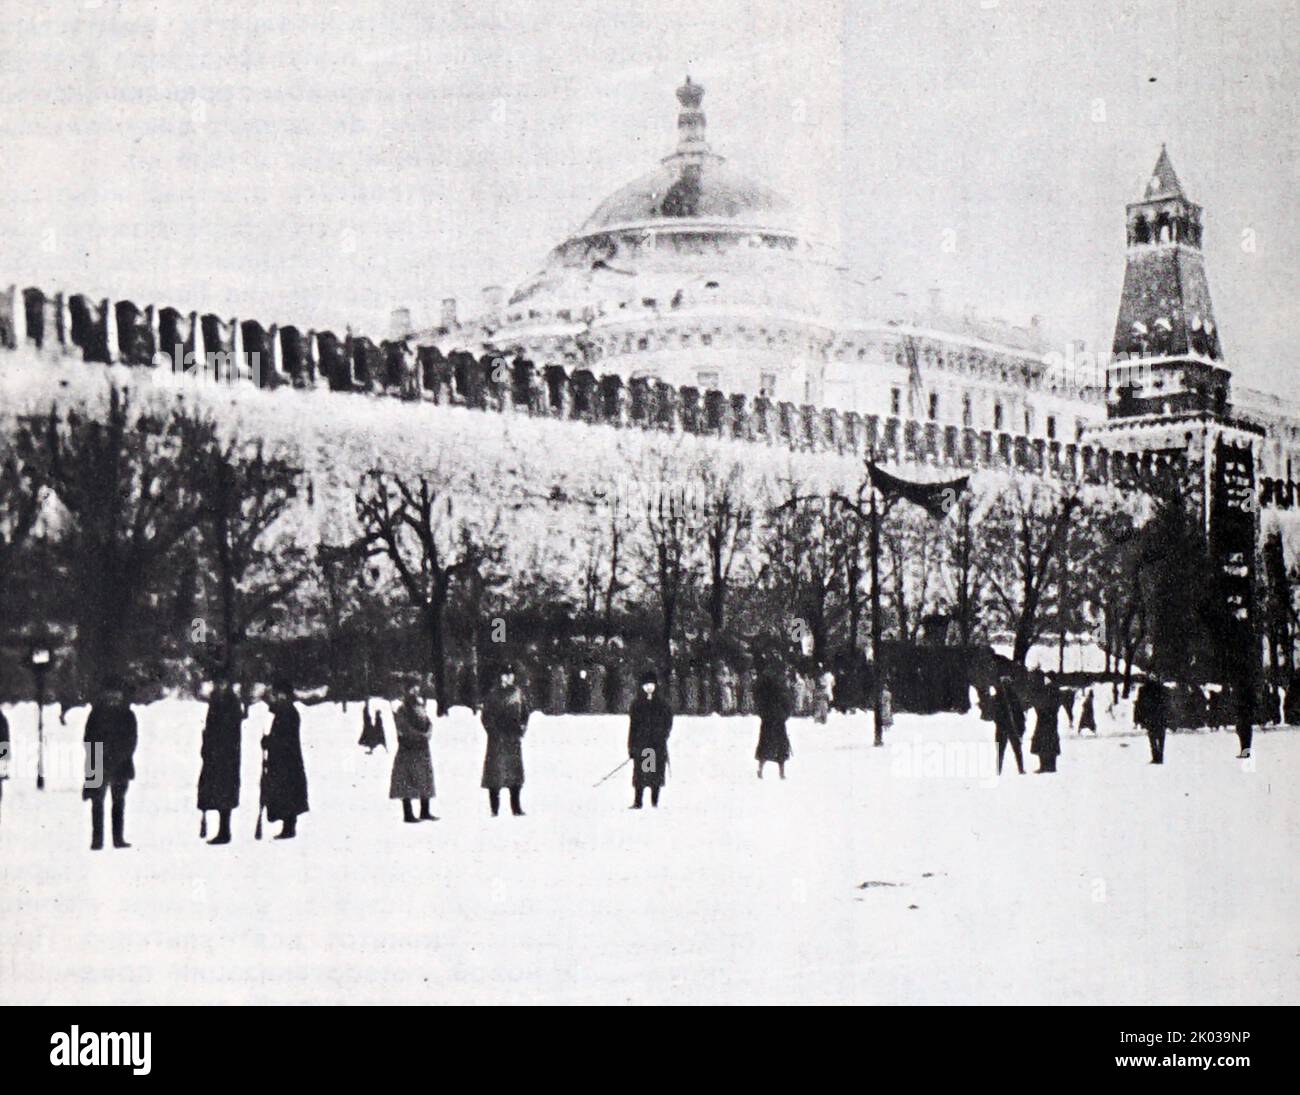 On Red Square after the beatings. Peasants and armed workers guard the Kremlin. 1917. Photo by A. Dorn. Stock Photo